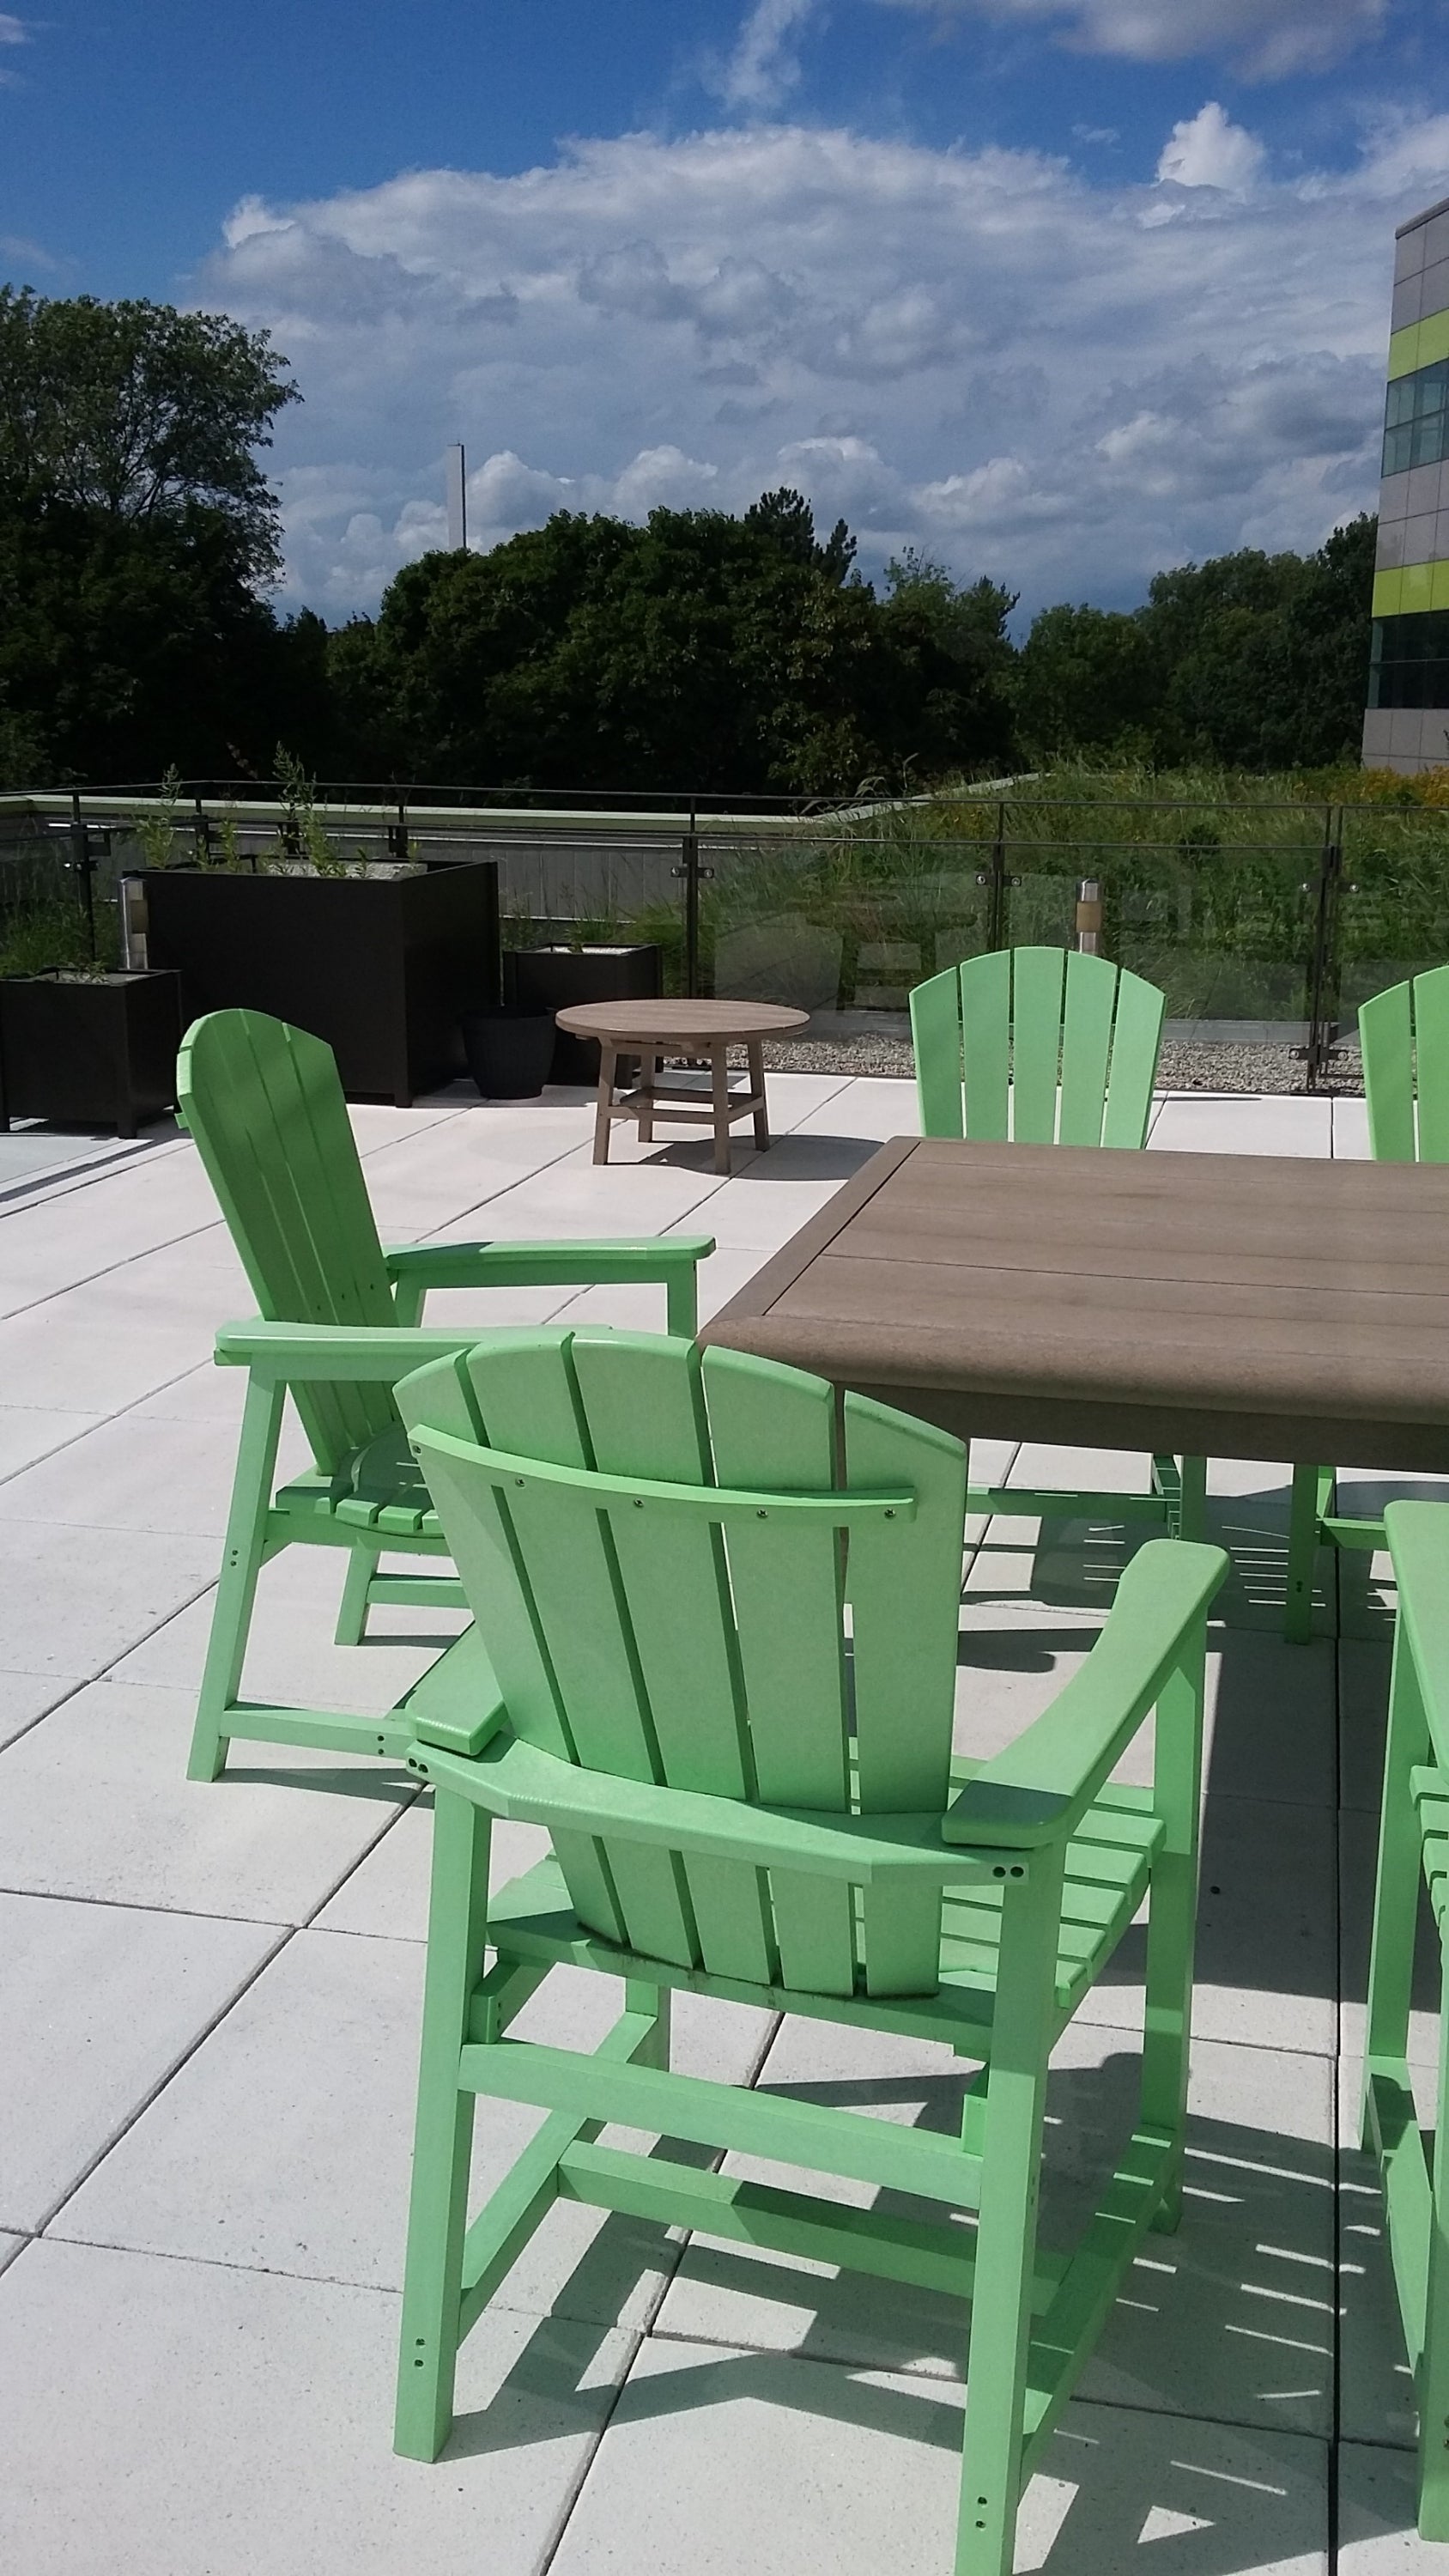 lime green lawn chair on the green roof